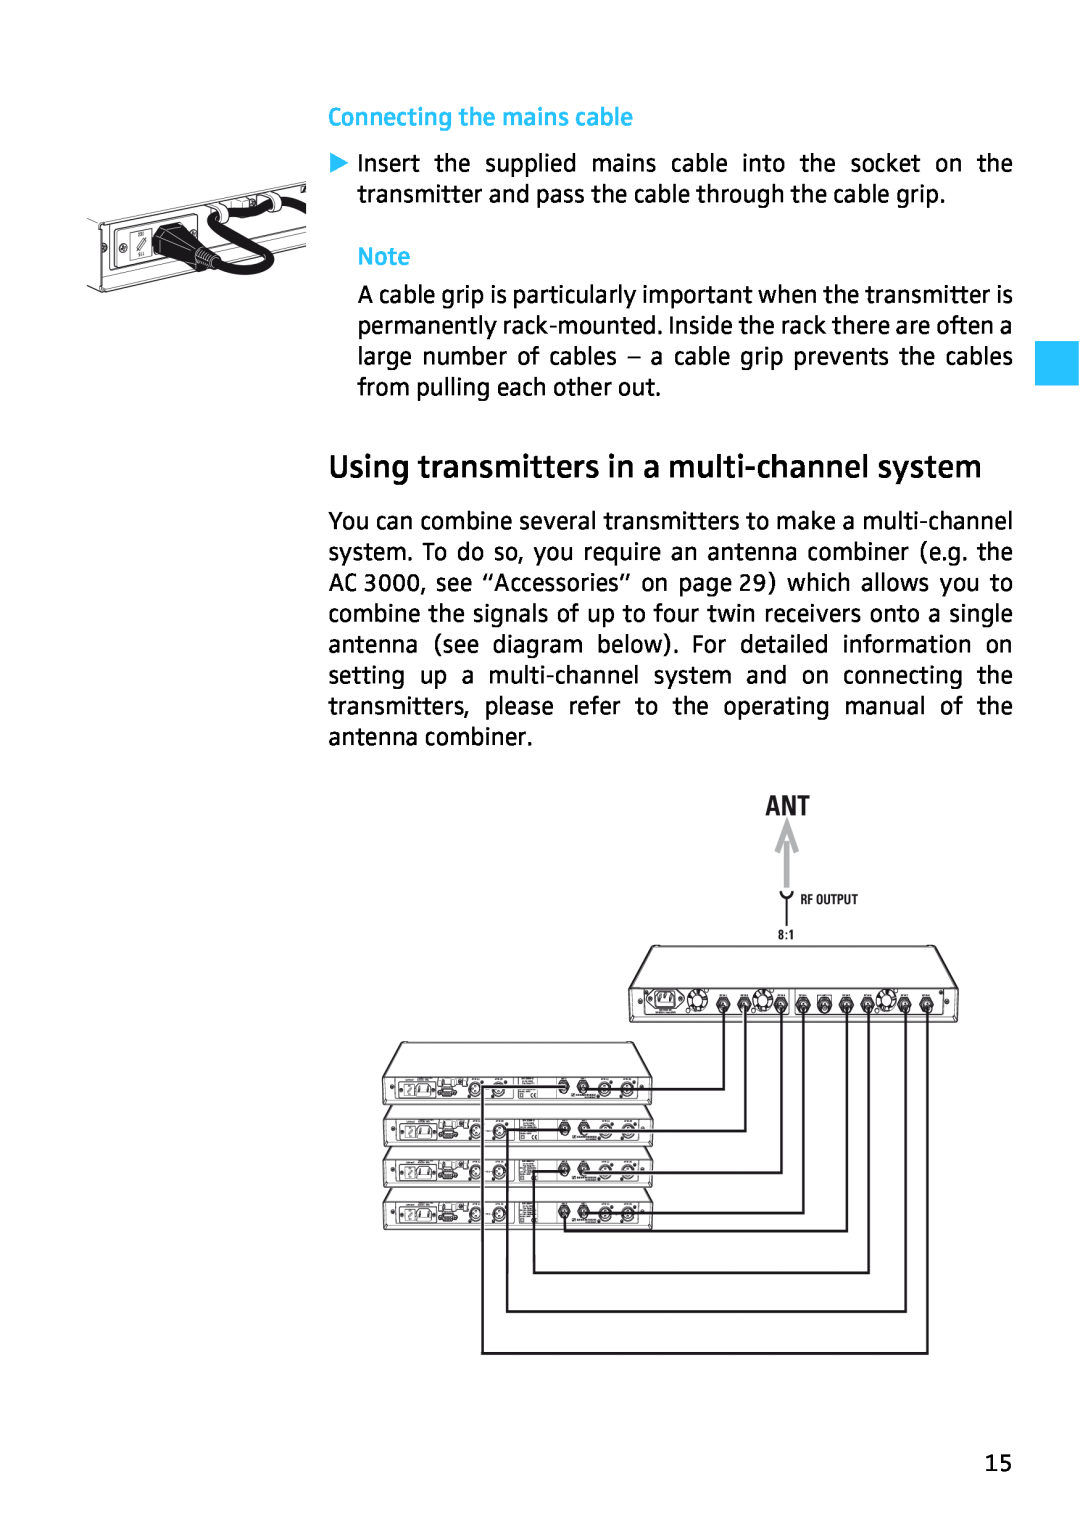 Sennheiser SR 3256, SR 3254 manual Using transmitters in a multi-channelsystem, Connecting the mains cable 